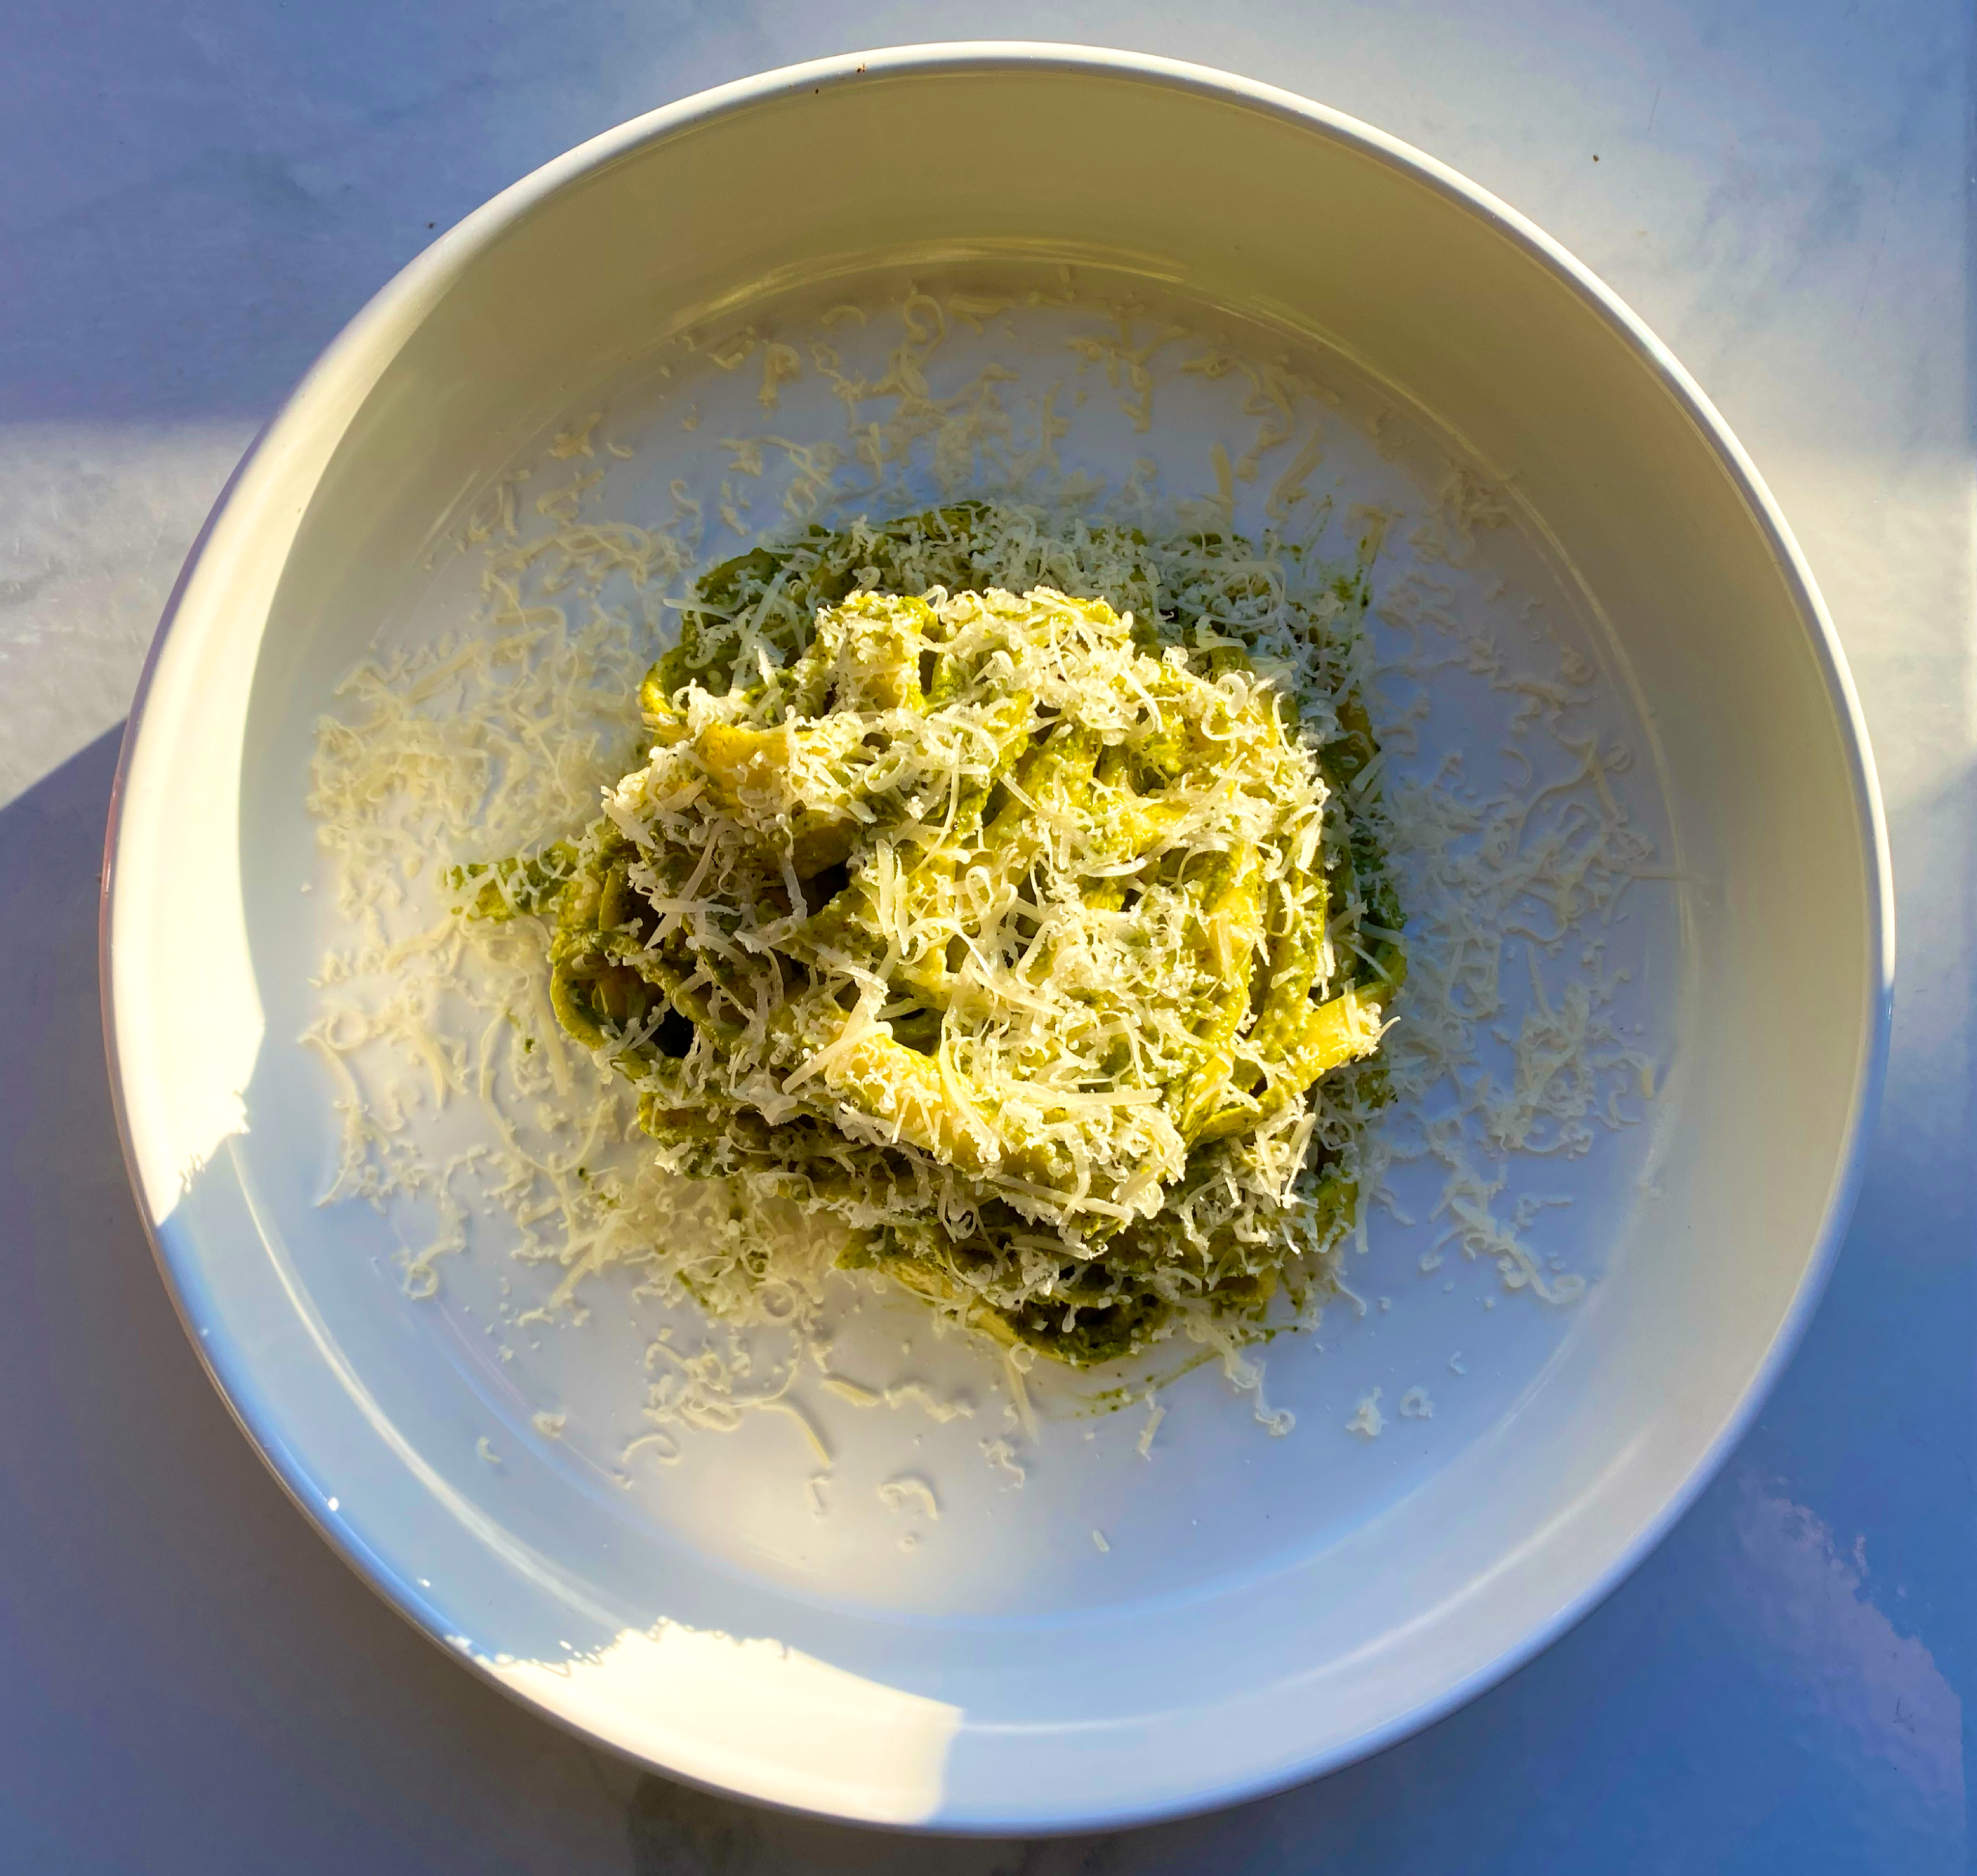 This Family Inspired Pesto Recipe Will Make You Drool